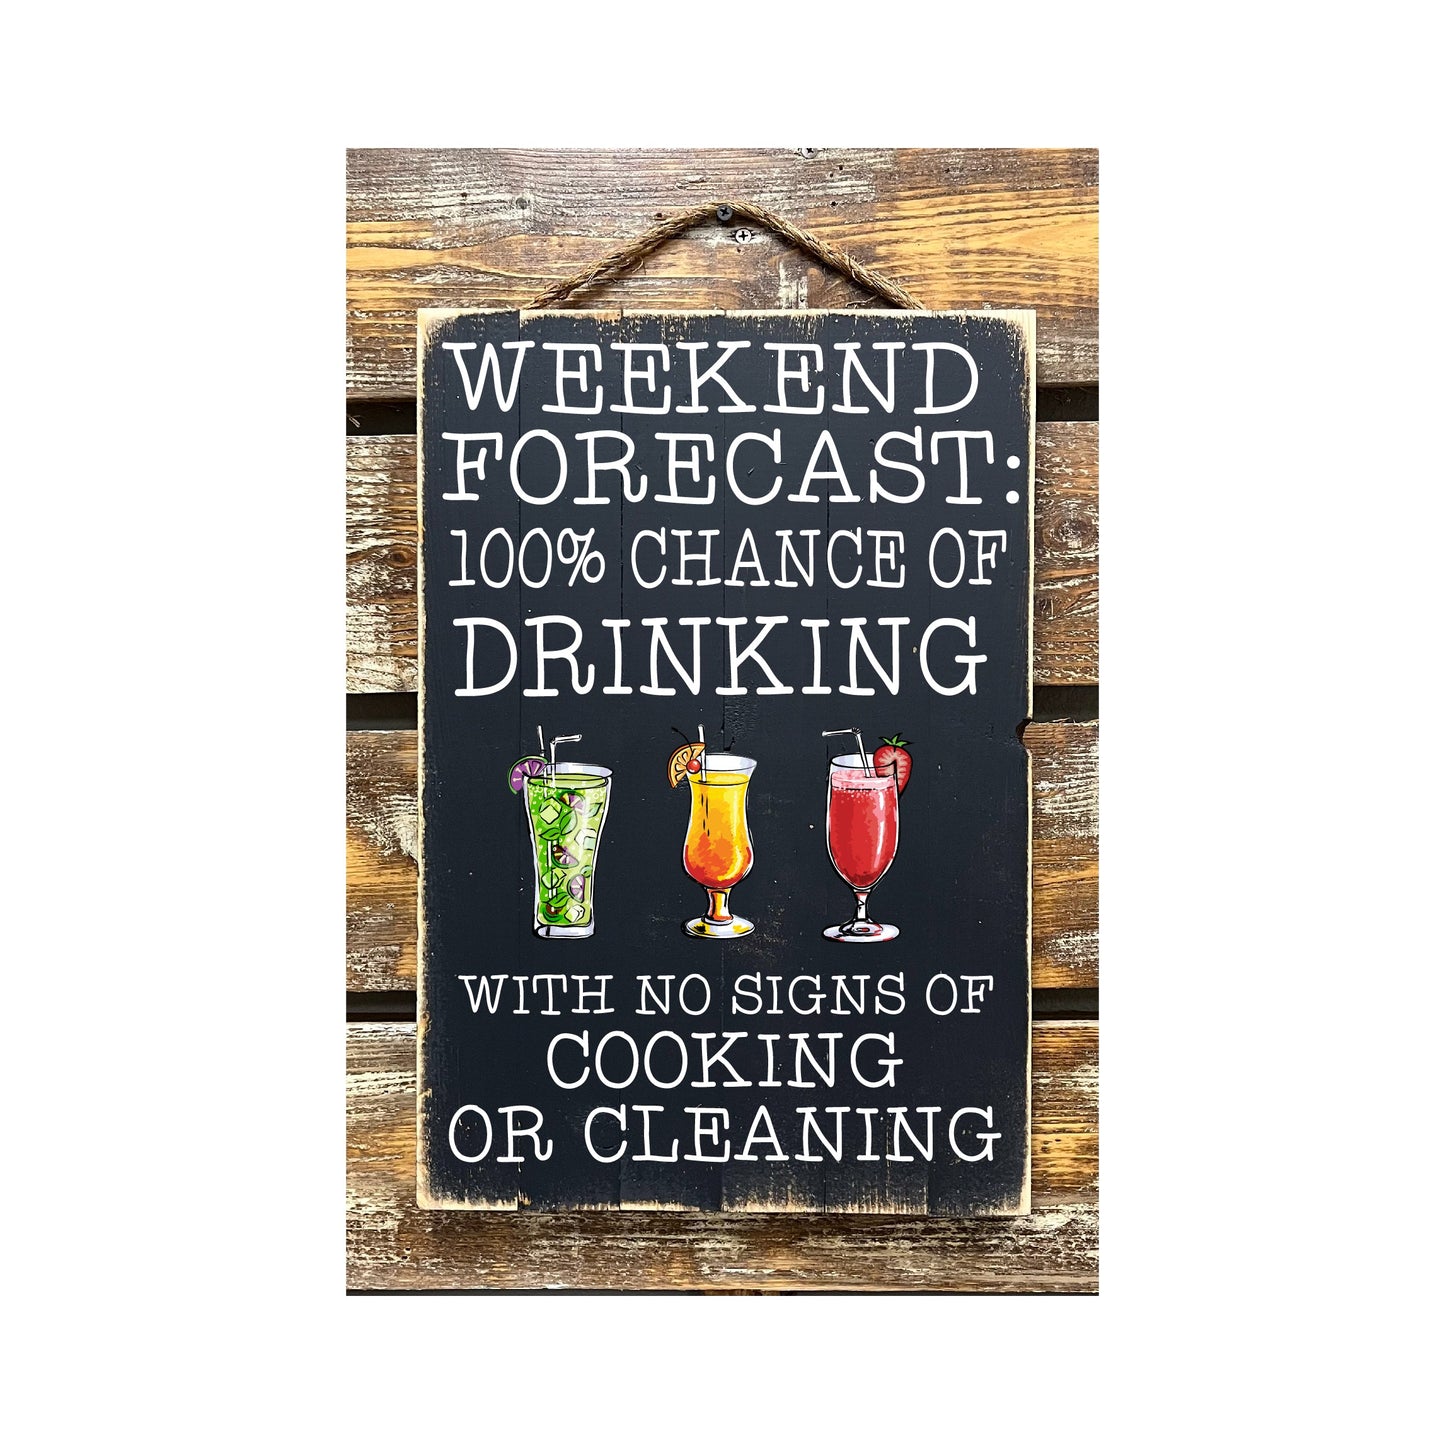 Weekend Forecast 100% Chance Of Drinking No Cooking Or Cleaning